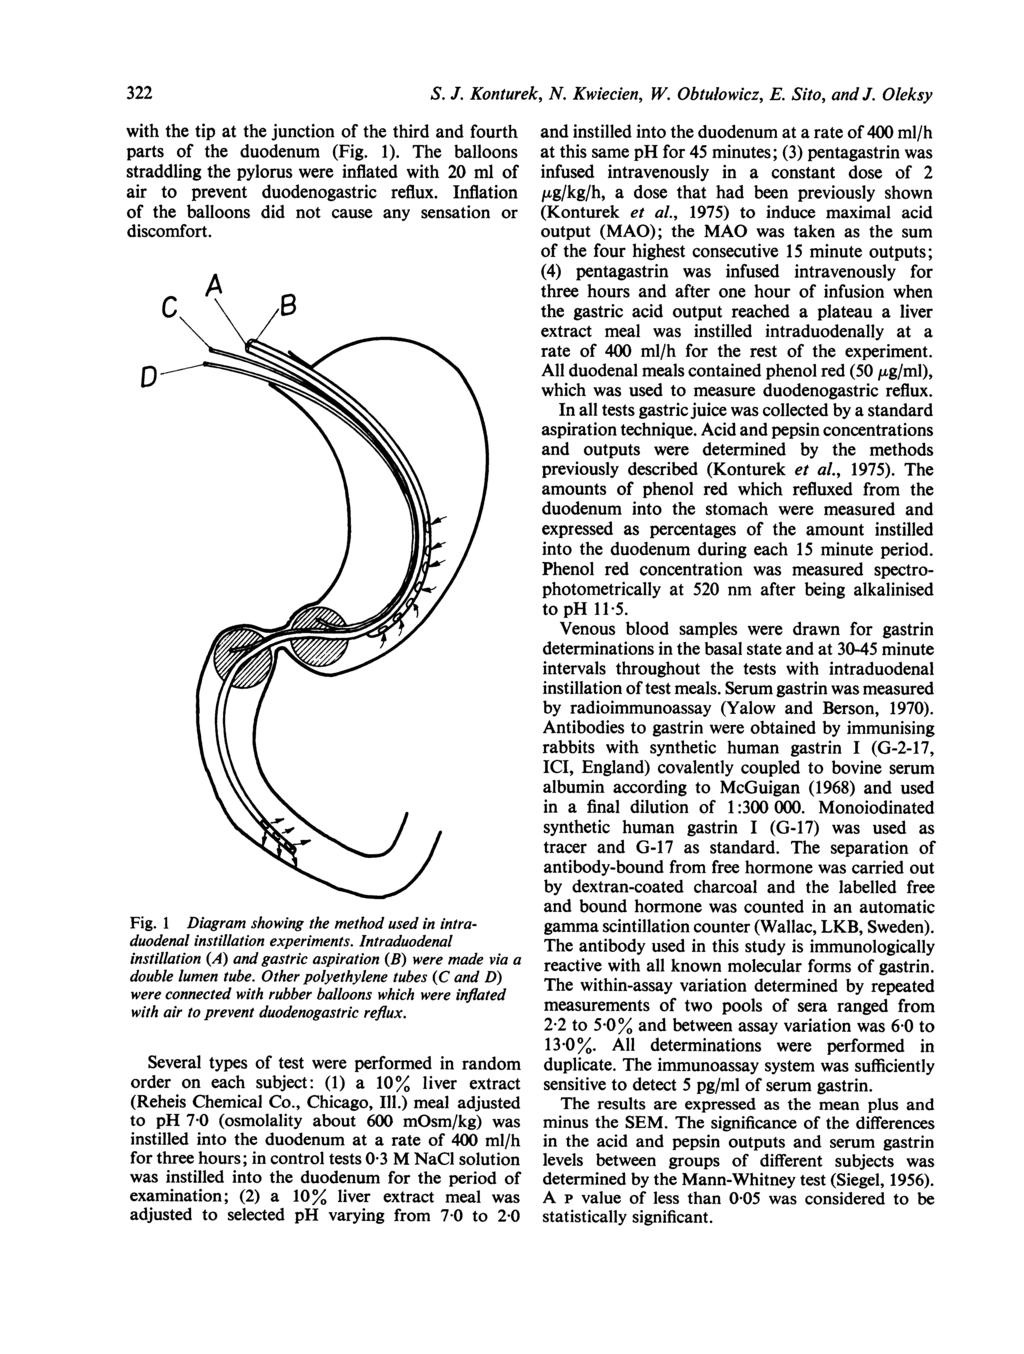 322 with the tip at the junction of the third and fourth parts of the duodenum (Fig. 1). The balloons straddling the pylorus were inflated with 20 ml of air to prevent duodenogastric reflux.